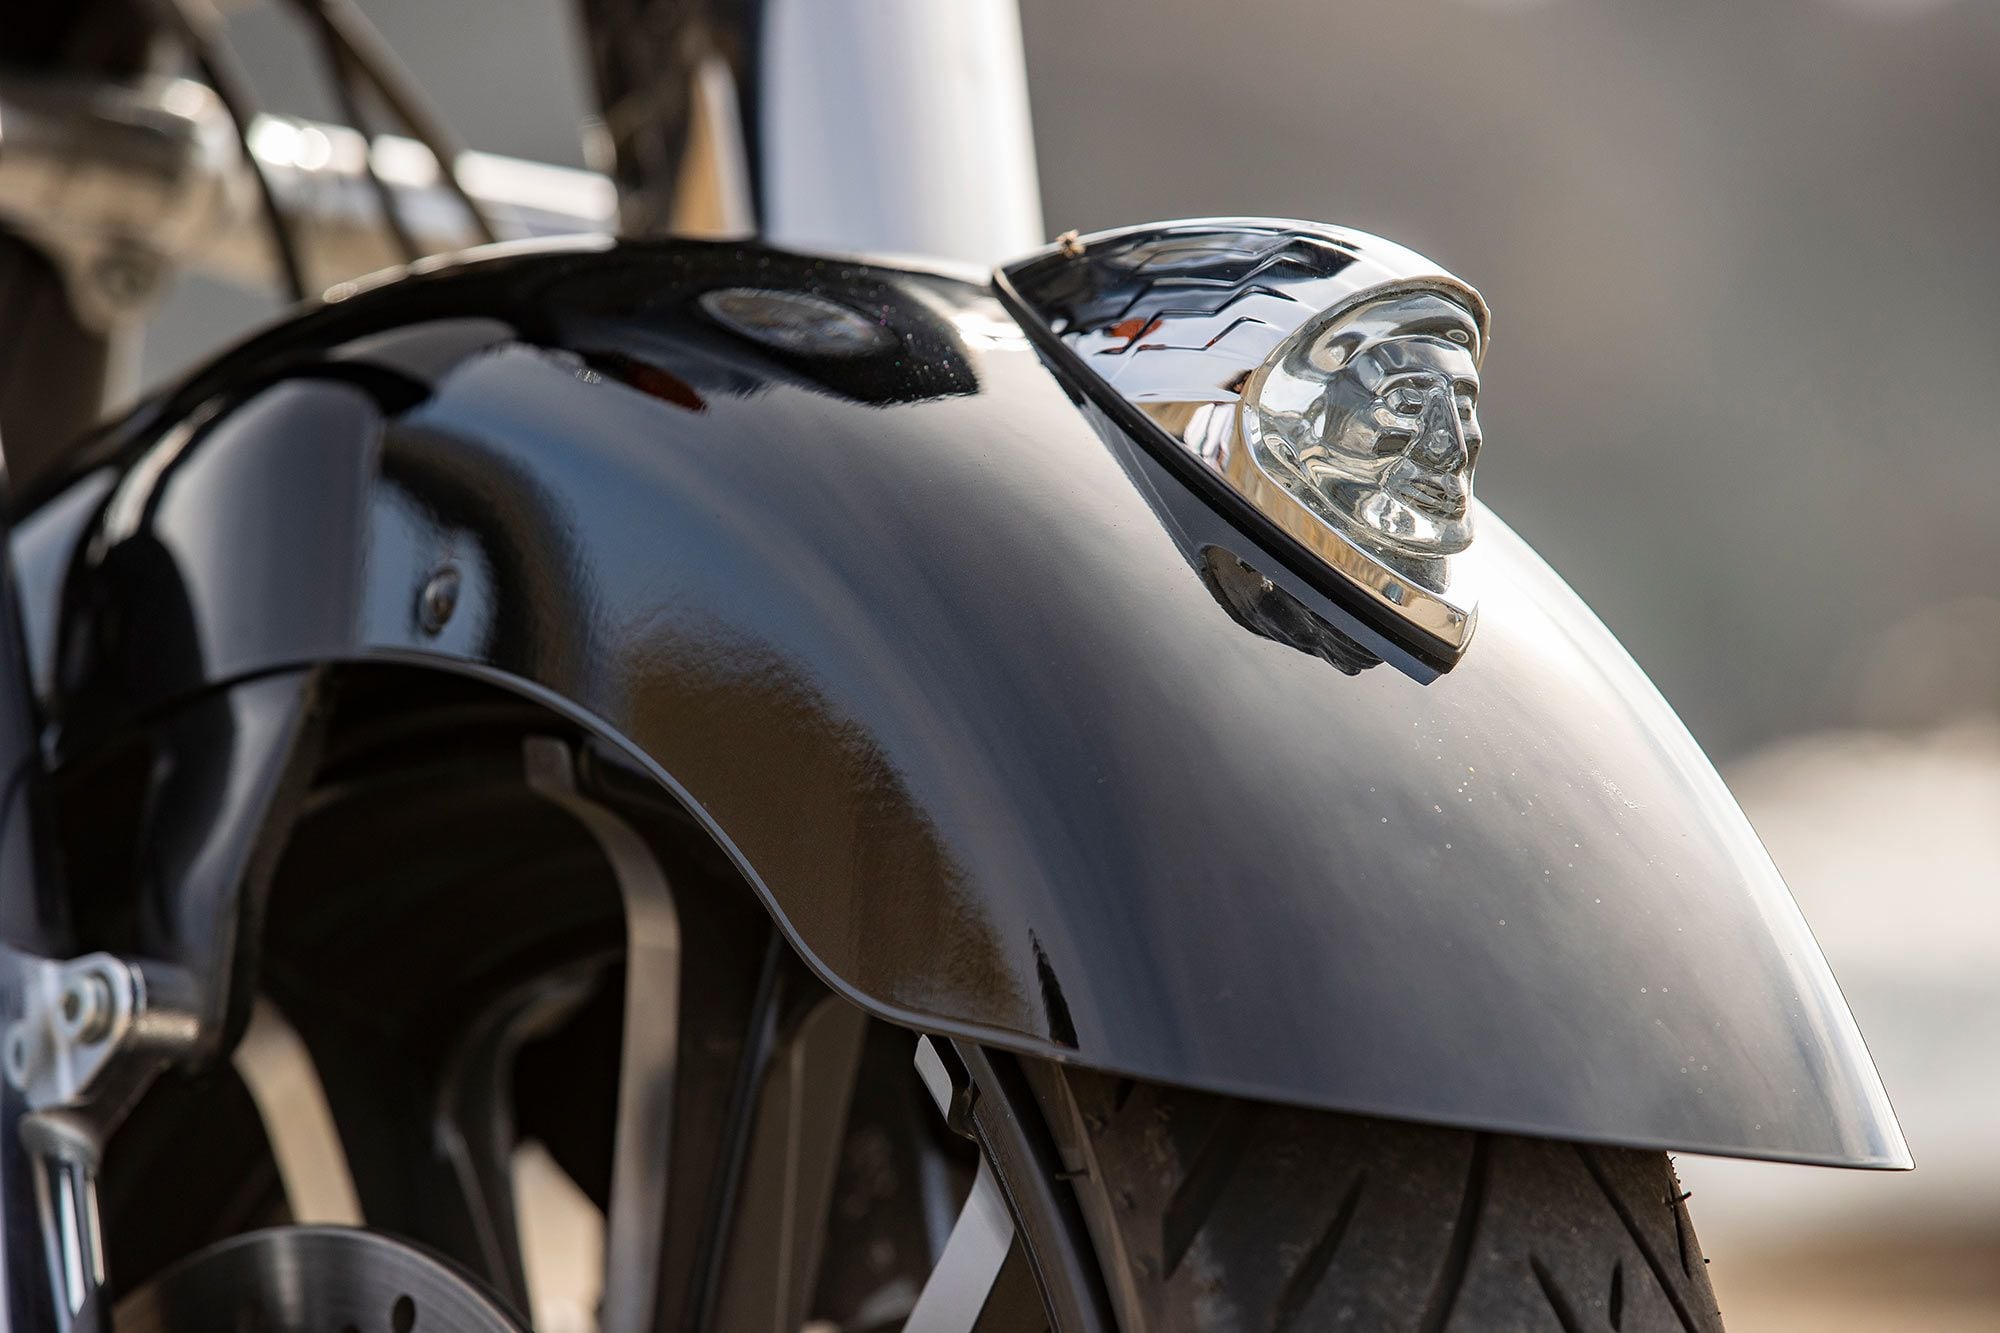 A nod to classic Indian Motorcycle design, the Indian headdress adorns the Chieftain’s front fender.